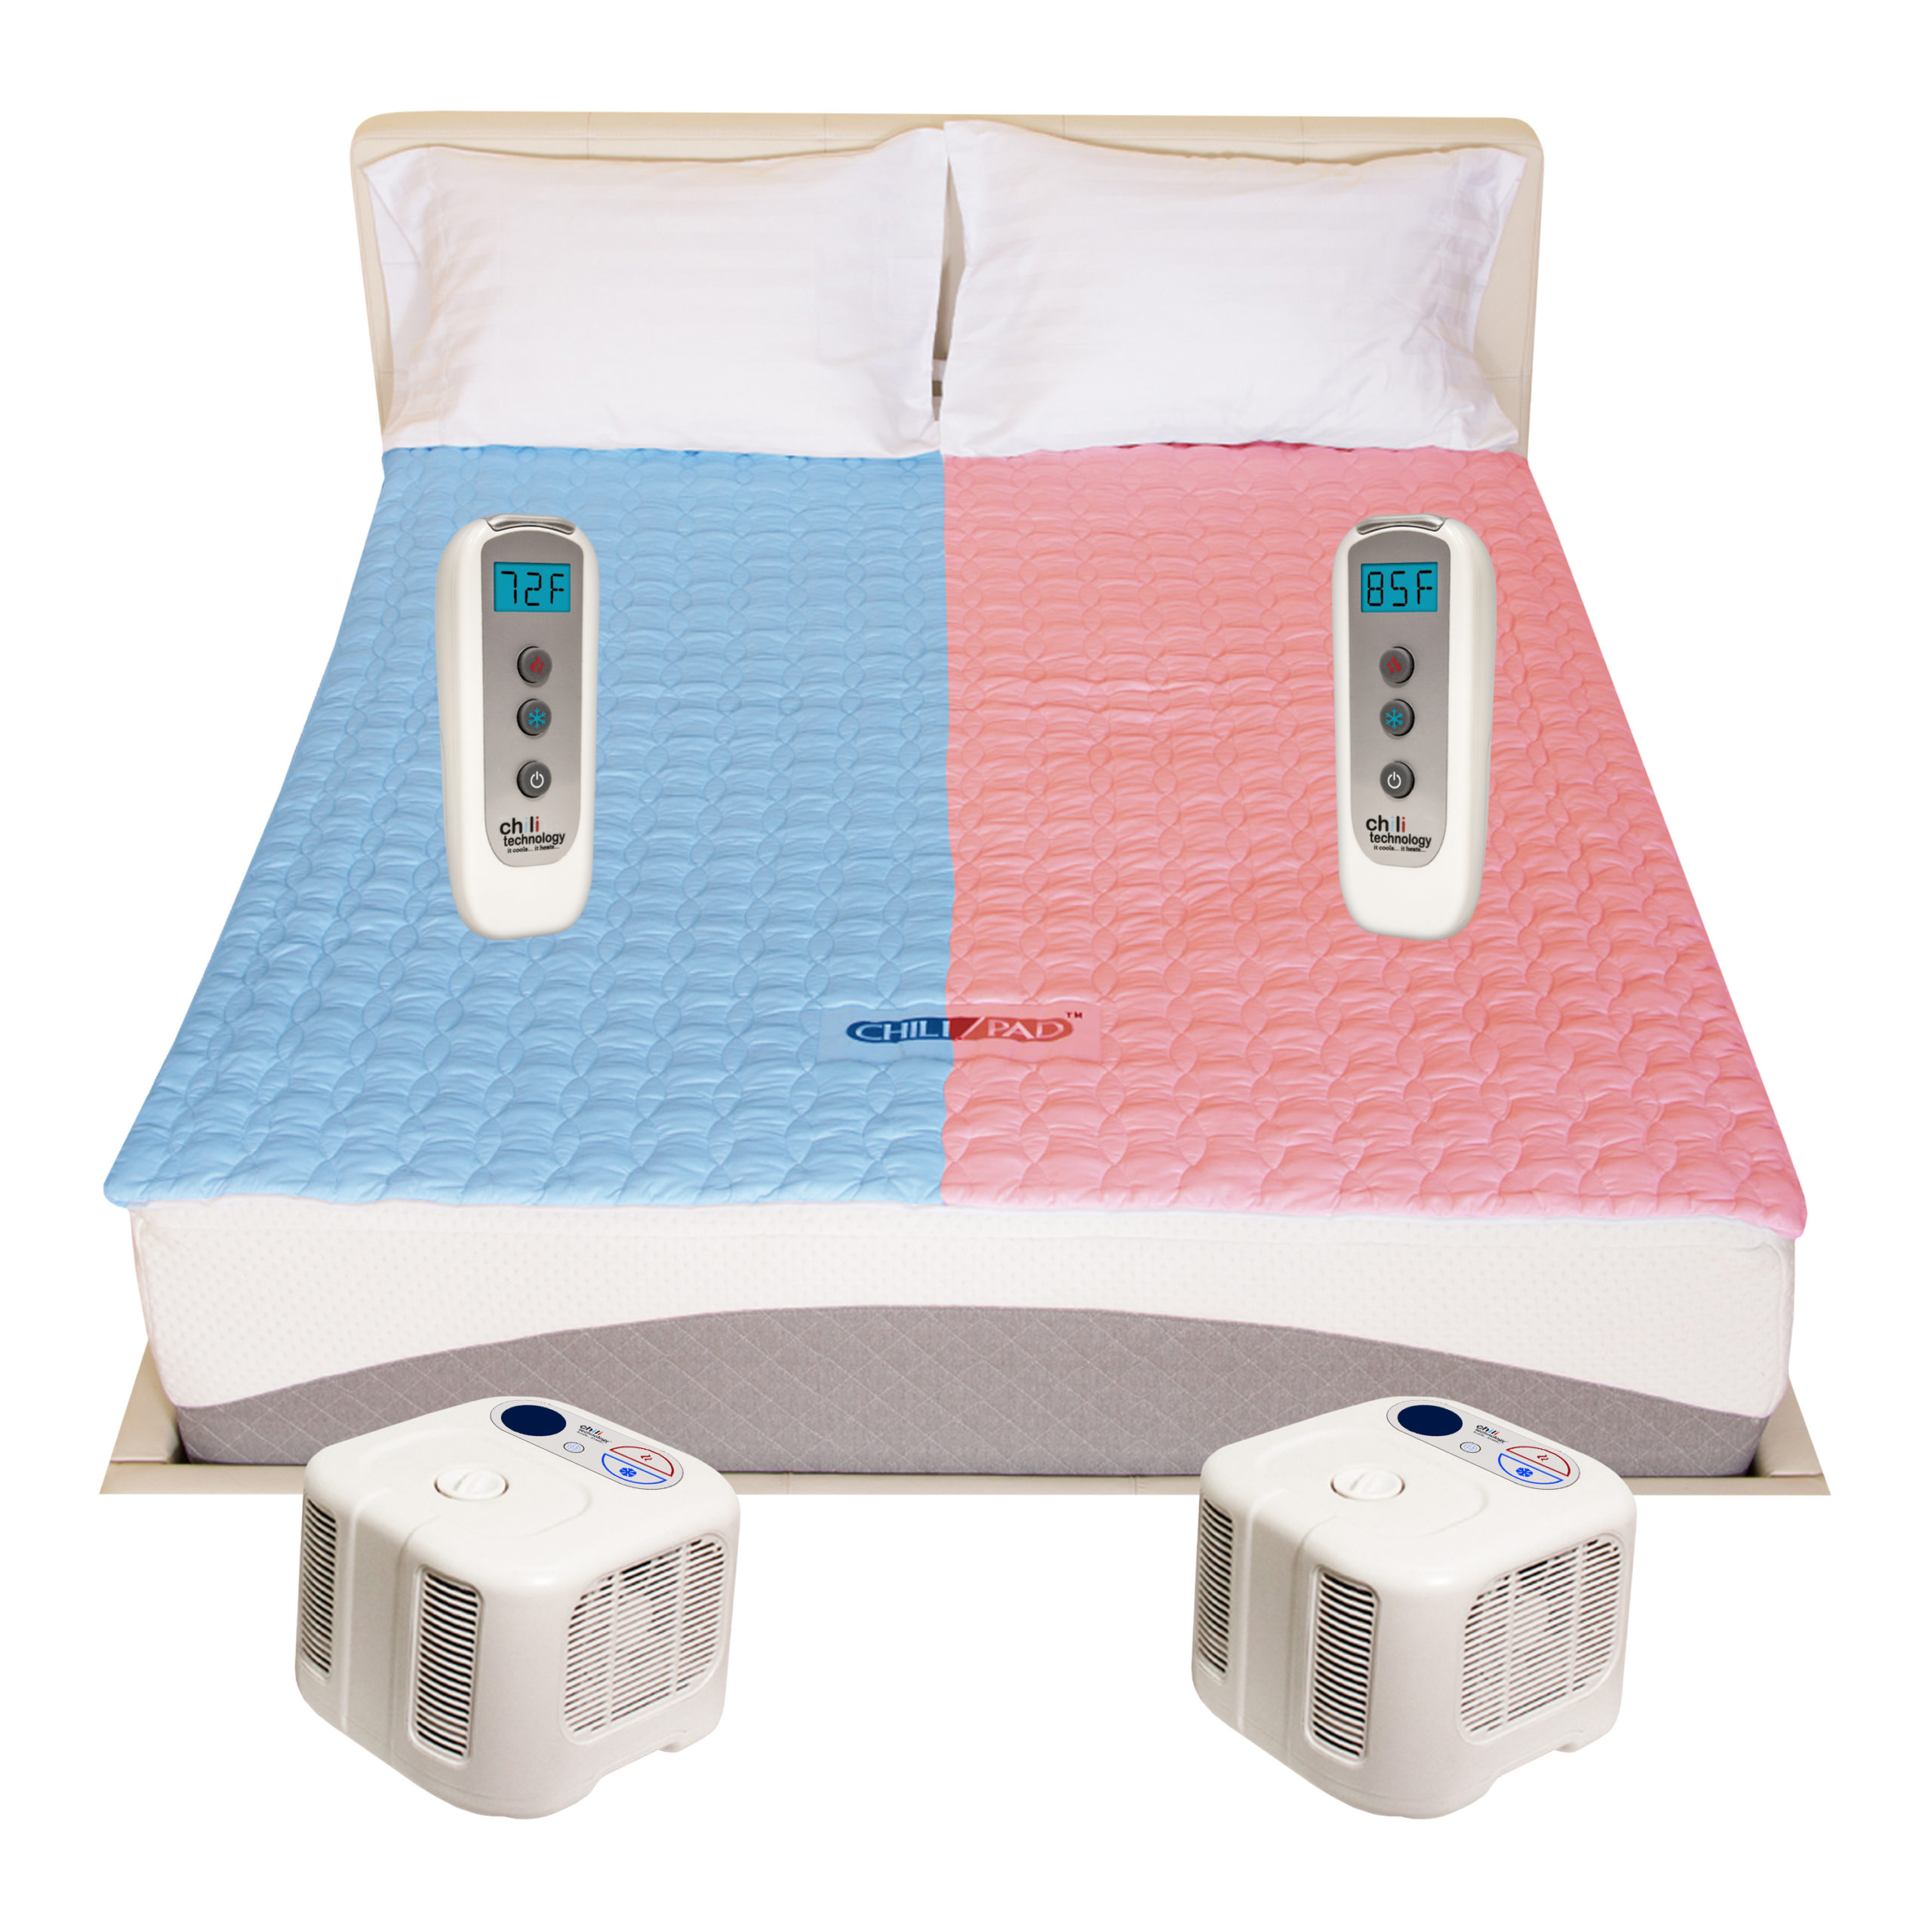 Remote Control Electric Blanket - Chilipad|Temperature|Mattress|Cube|Sleep|Bed|Water|System|Pad|Ooler|Control|Unit|Night|Bedjet|Technology|Side|Air|Product|Review|Body|Time|Degrees|Noise|Price|Pod|Tubes|Heat|Device|Cooling|Room|King|App|Features|Size|Cover|Sleepers|Sheets|Energy|Warranty|Quality|Mattress Pad|Control Unit|Cube Sleep System|Sleep Pod|Distilled Water|Remote Control|Sleep System|Desired Temperature|Water Tank|Chilipad Cube|Chili Technology|Deep Sleep|Pro Cover|Ooler Sleep System|Hydrogen Peroxide|Cool Mesh|Sleep Temperature|Fitted Sheet|Pod Pro|Sleep Quality|Smartphone App|Sleep Systems|Chilipad Sleep System|New Mattress|Sleep Trial|Full Refund|Mattress Topper|Body Heat|Air Flow|Chilipad Review